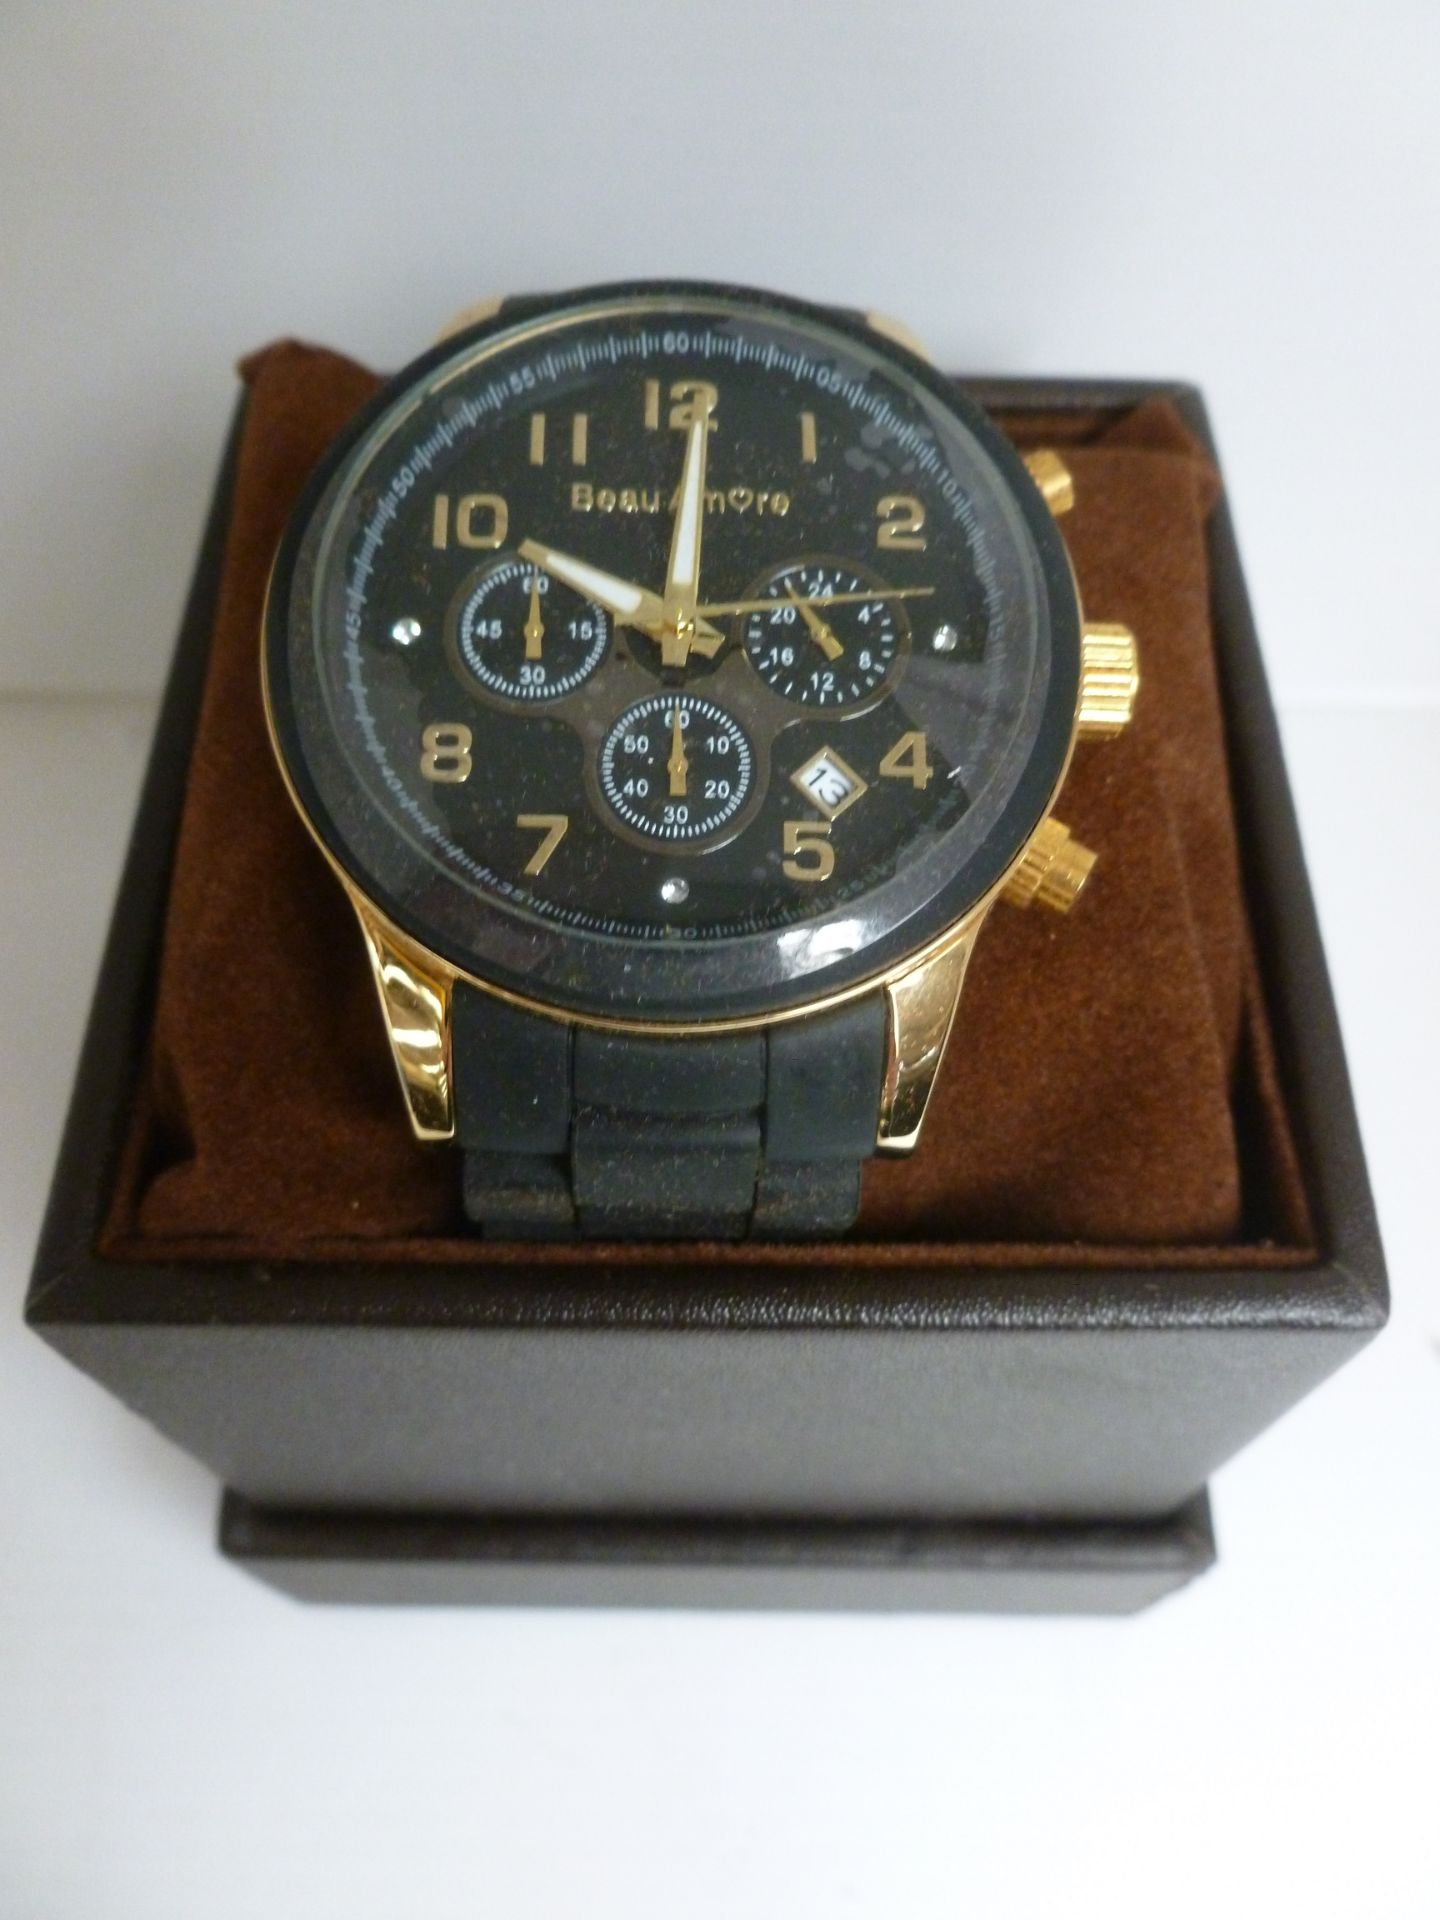 NO VAT!! Beau Amore Black and Gold coloured Watch in the style of the very popular Michael Kors